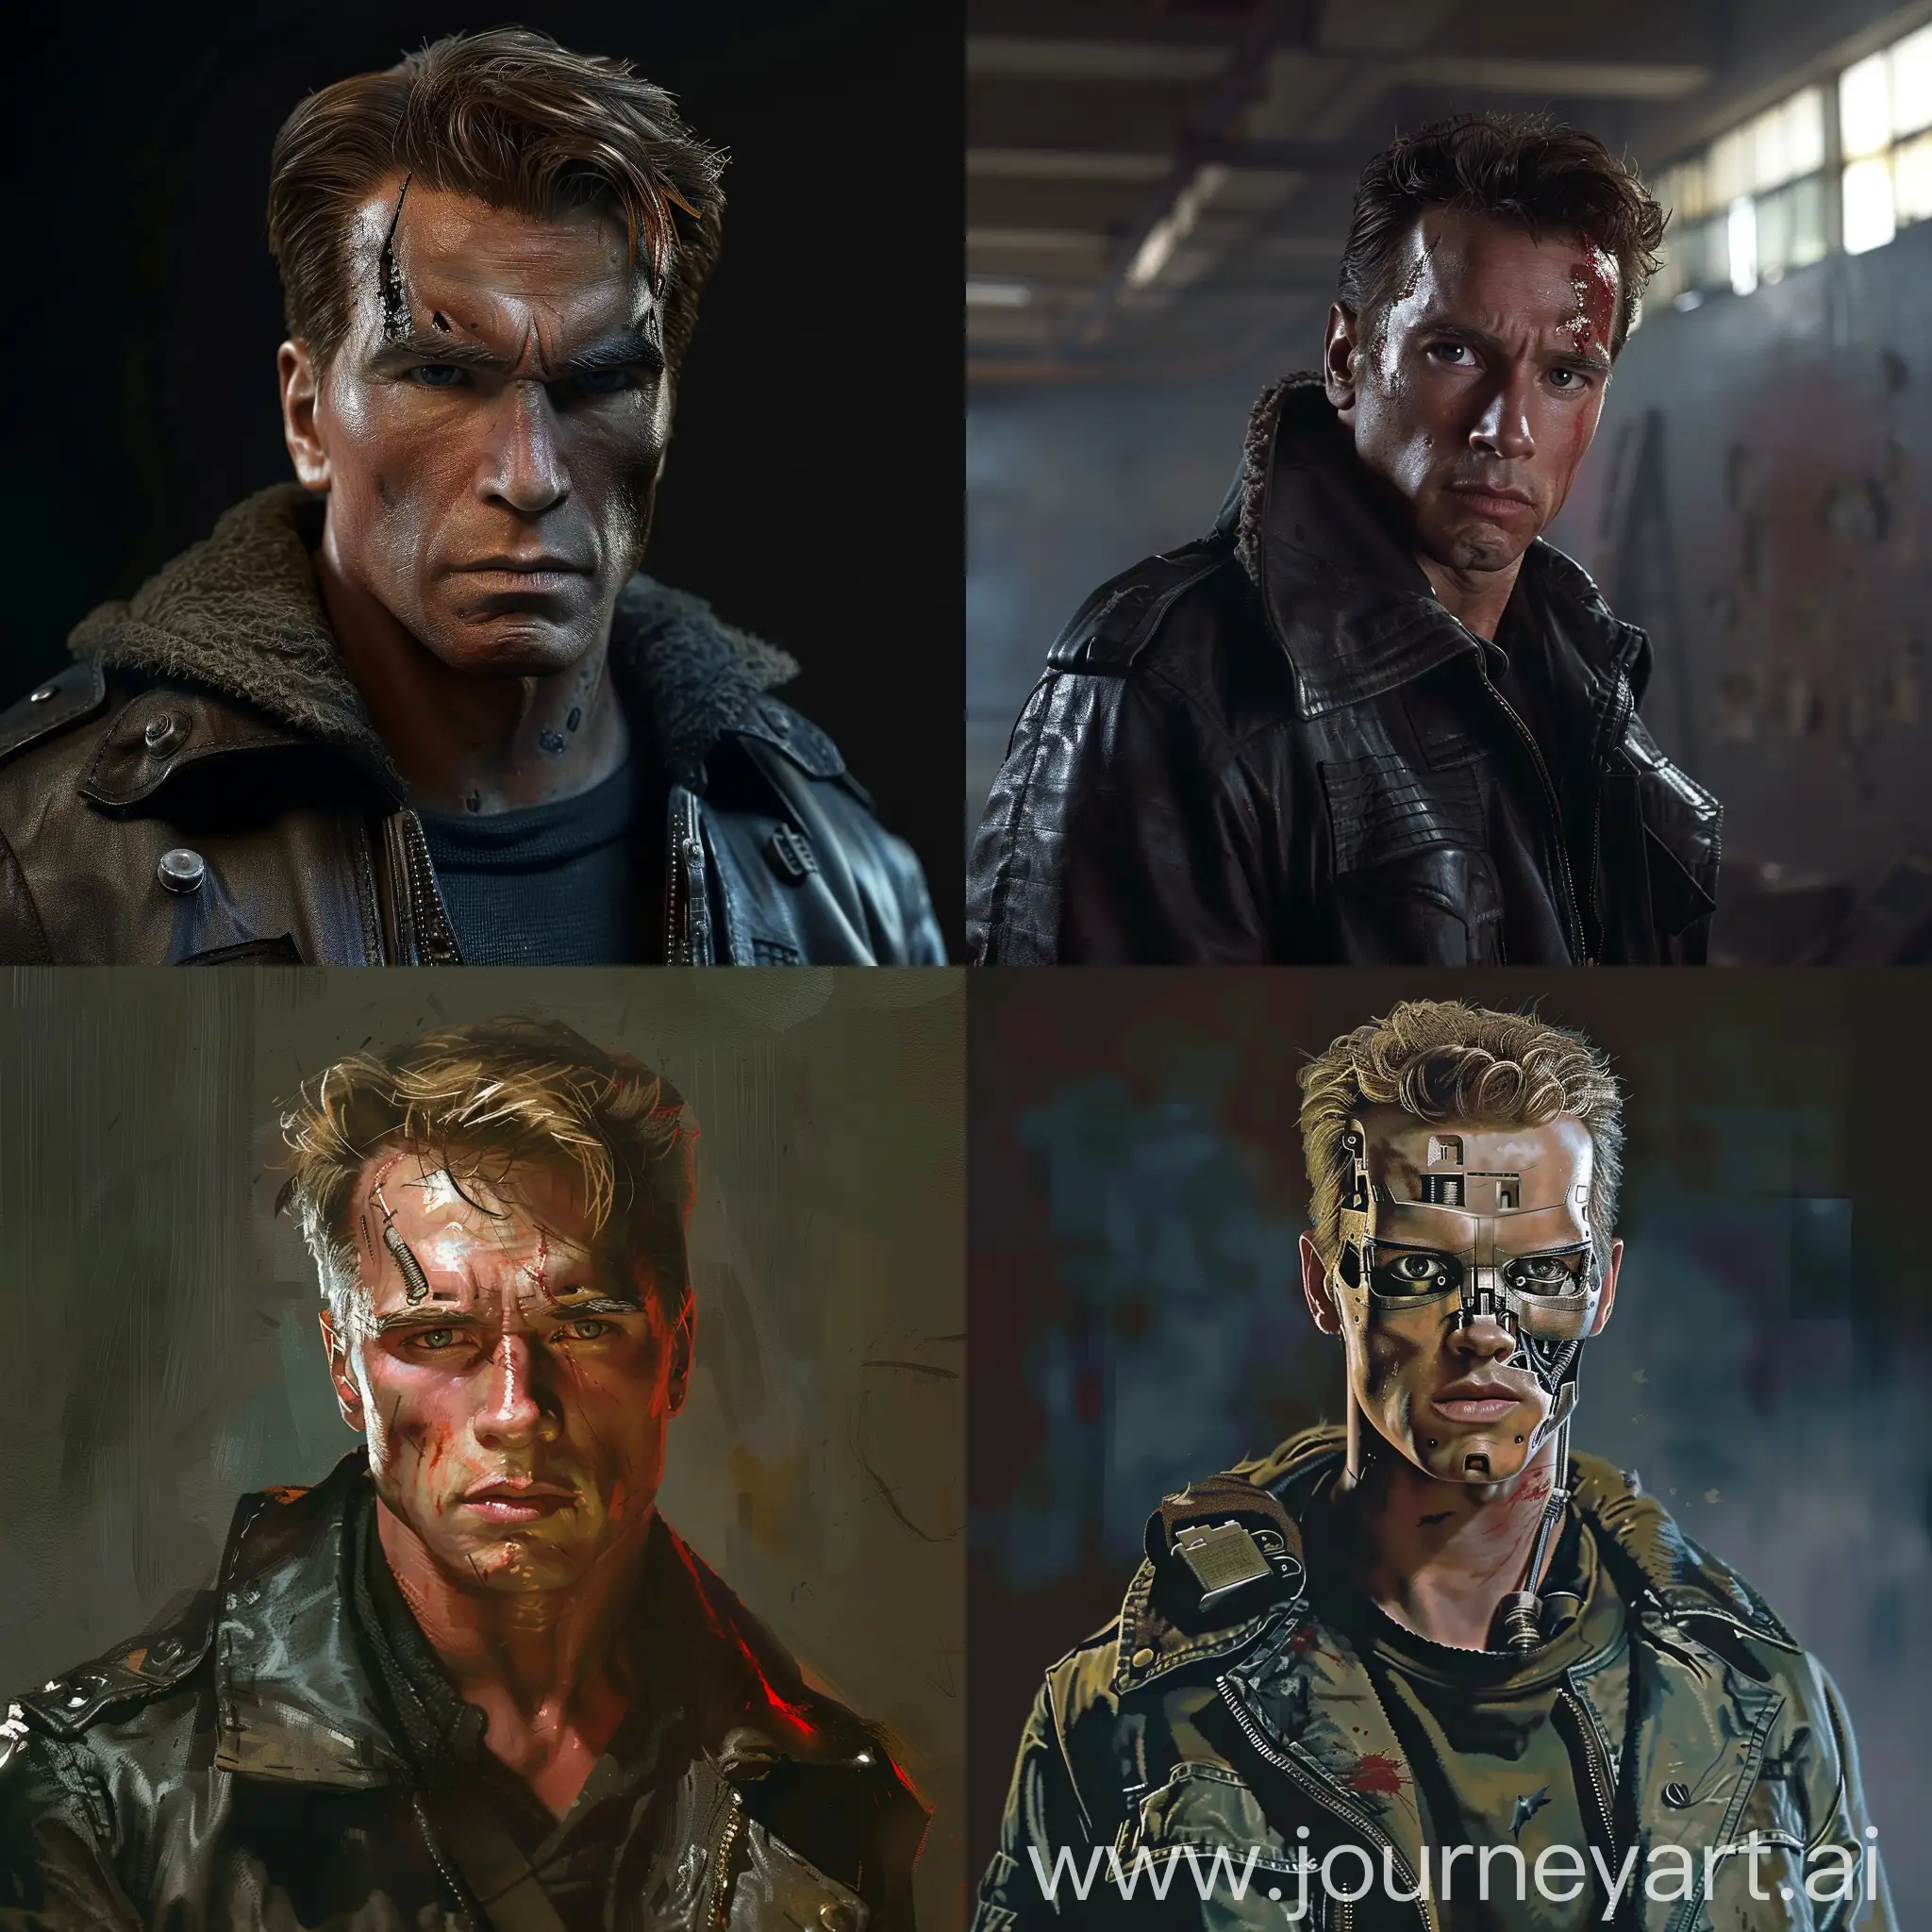 Kyle-Reese-Terminator-1984-Fan-Art-with-V6-Aesthetic